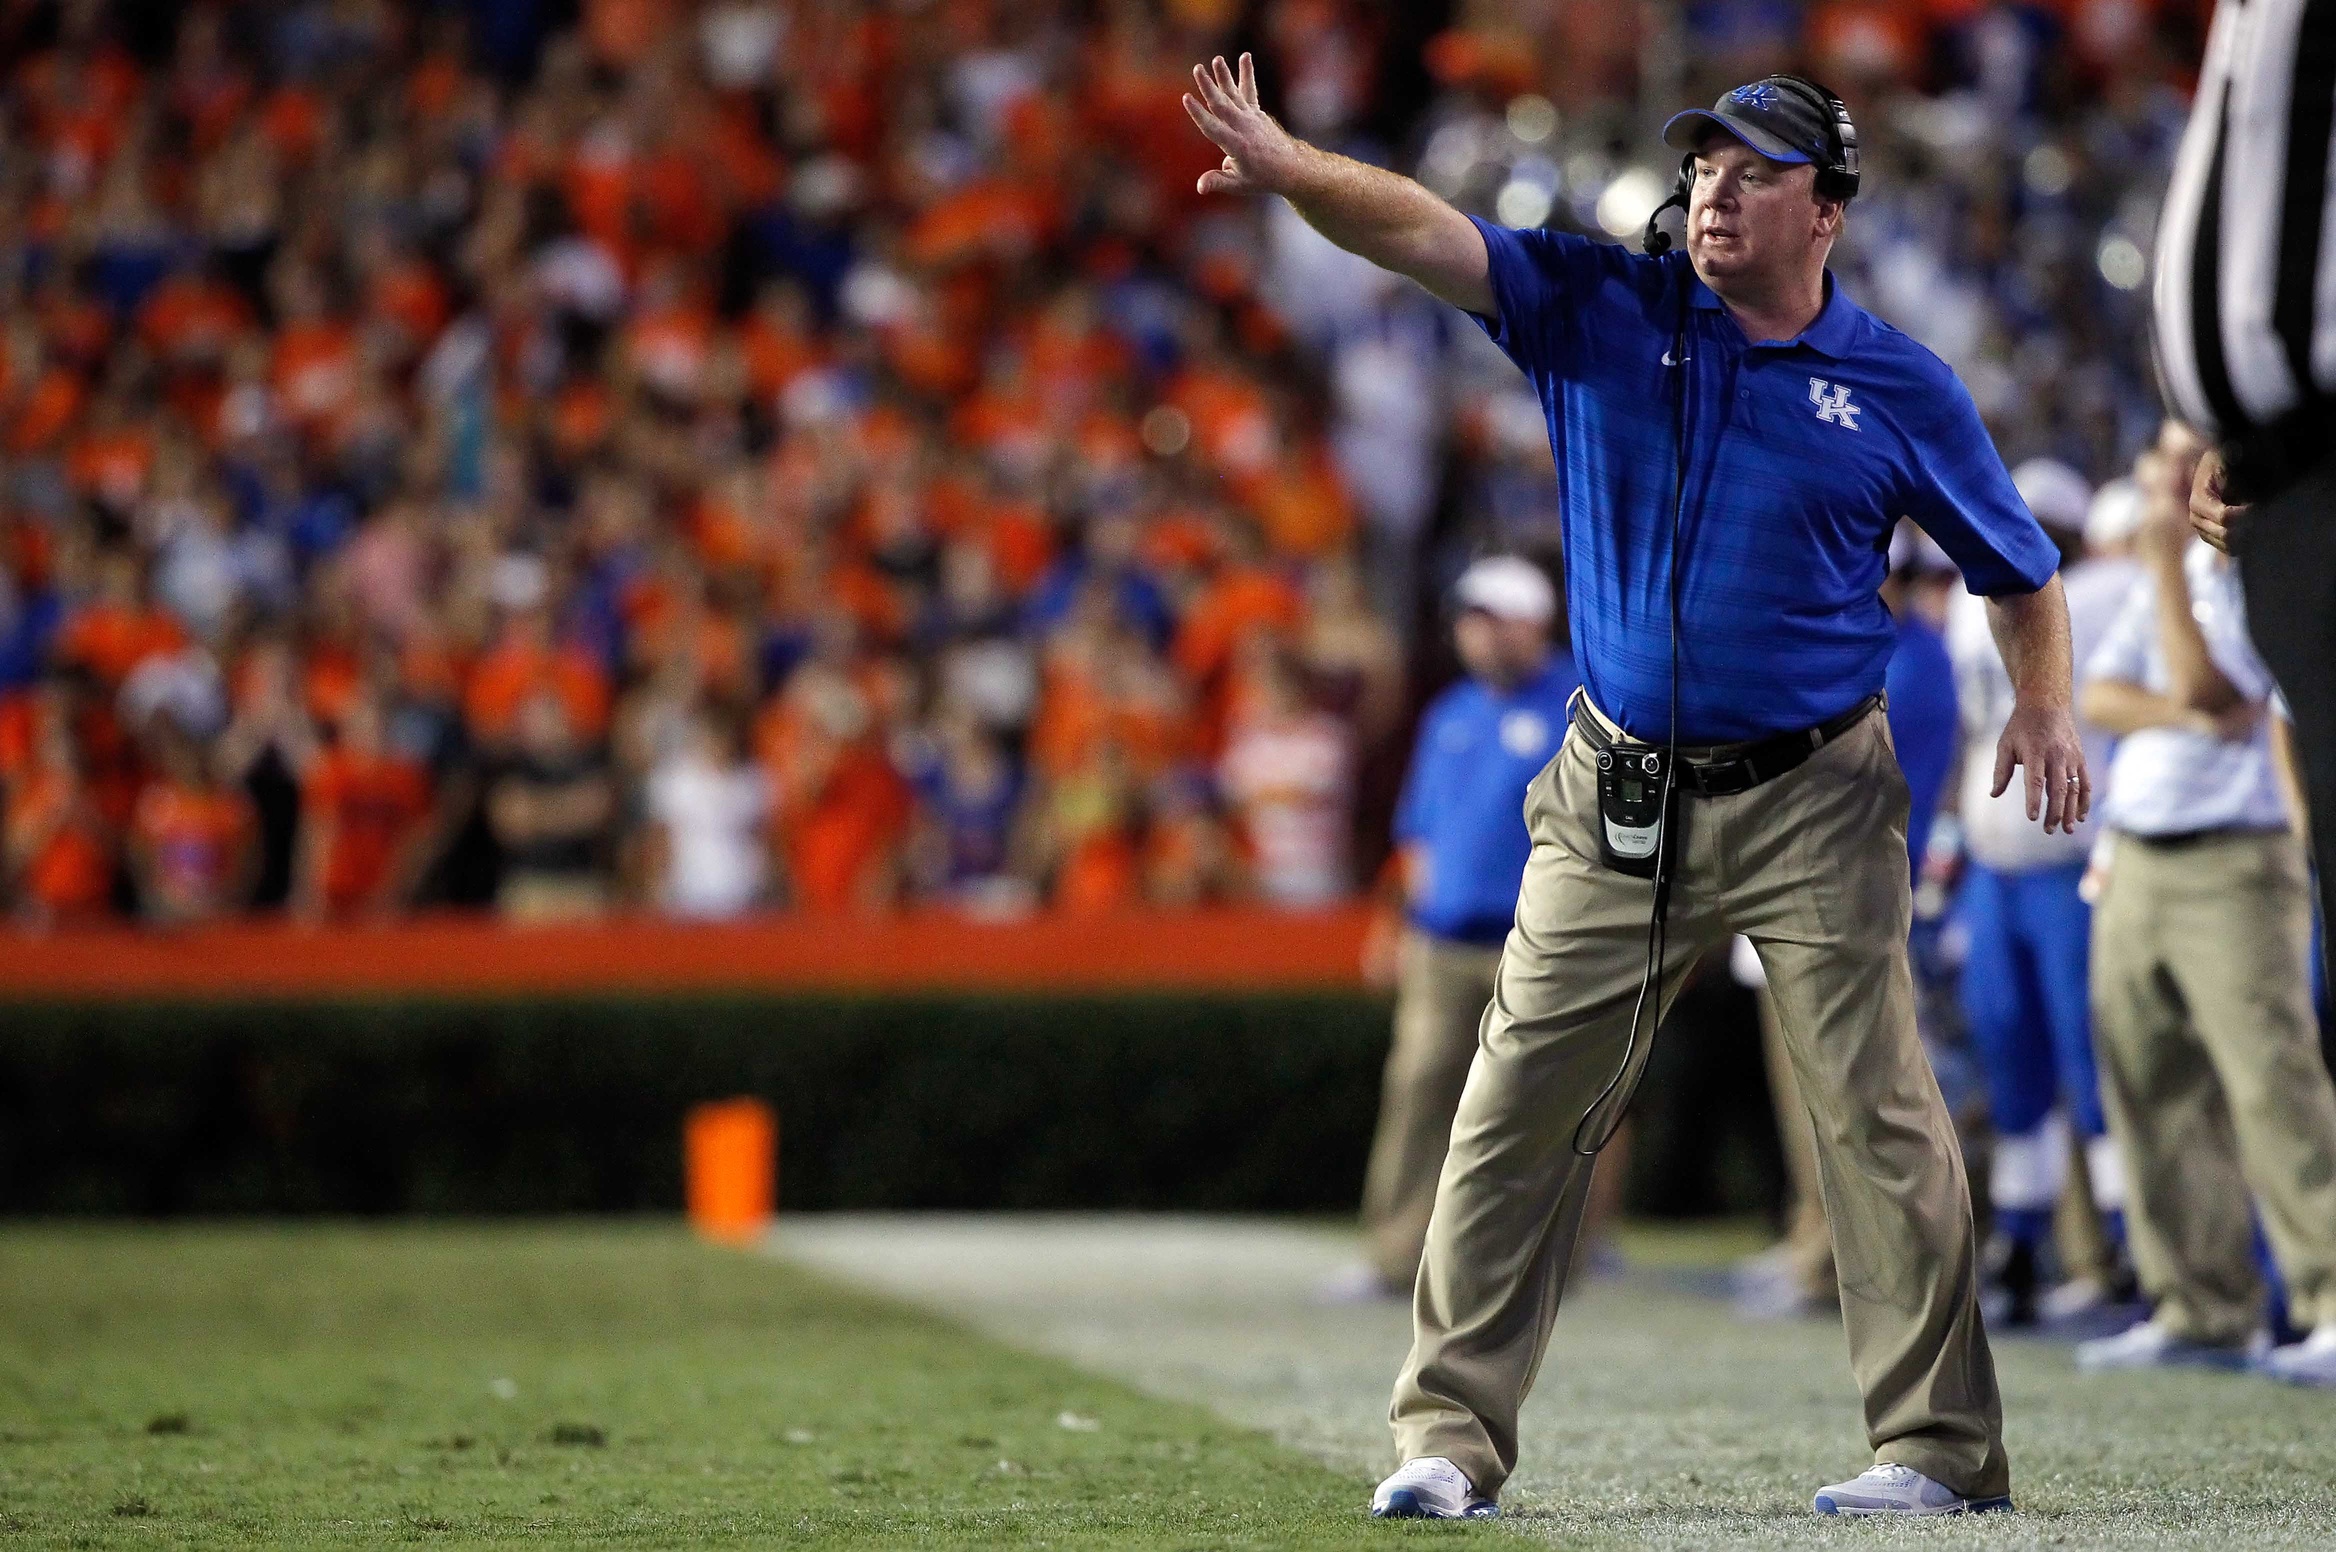 Sep 13, 2014; Gainesville, FL, USA; Kentucky Wildcats head coach Mark Stoops reacts against the Florida Gators at Ben Hill Griffin Stadium. Florida Gators defeated the Kentucky Wildcats 36-30. Mandatory Credit: Kim Klement-USA TODAY Sports